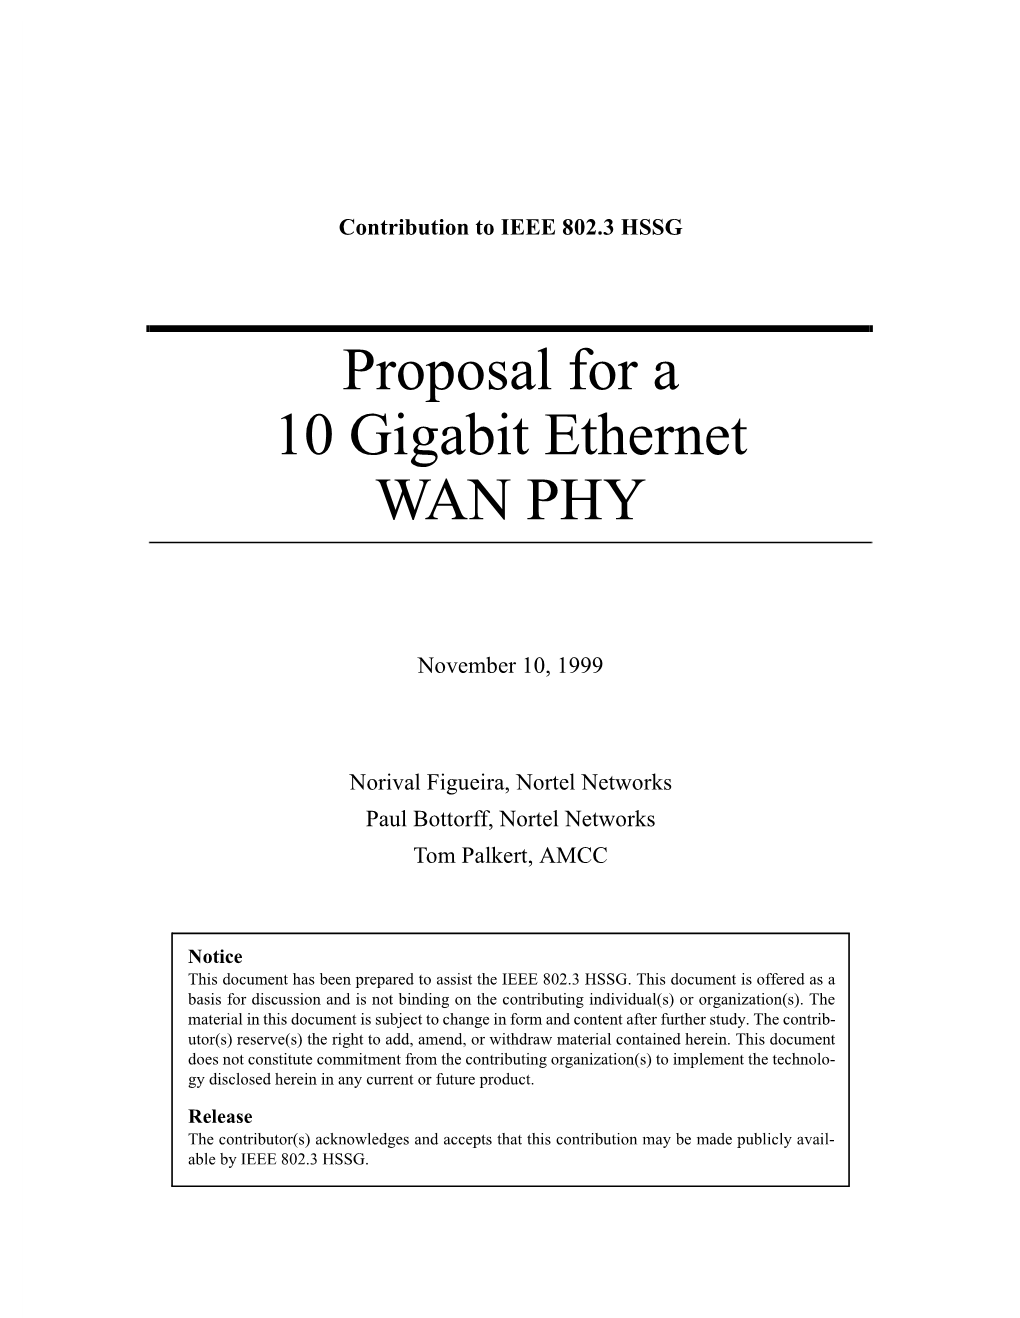 Proposal for a 10 Gigabit Ethernet WAN PHY